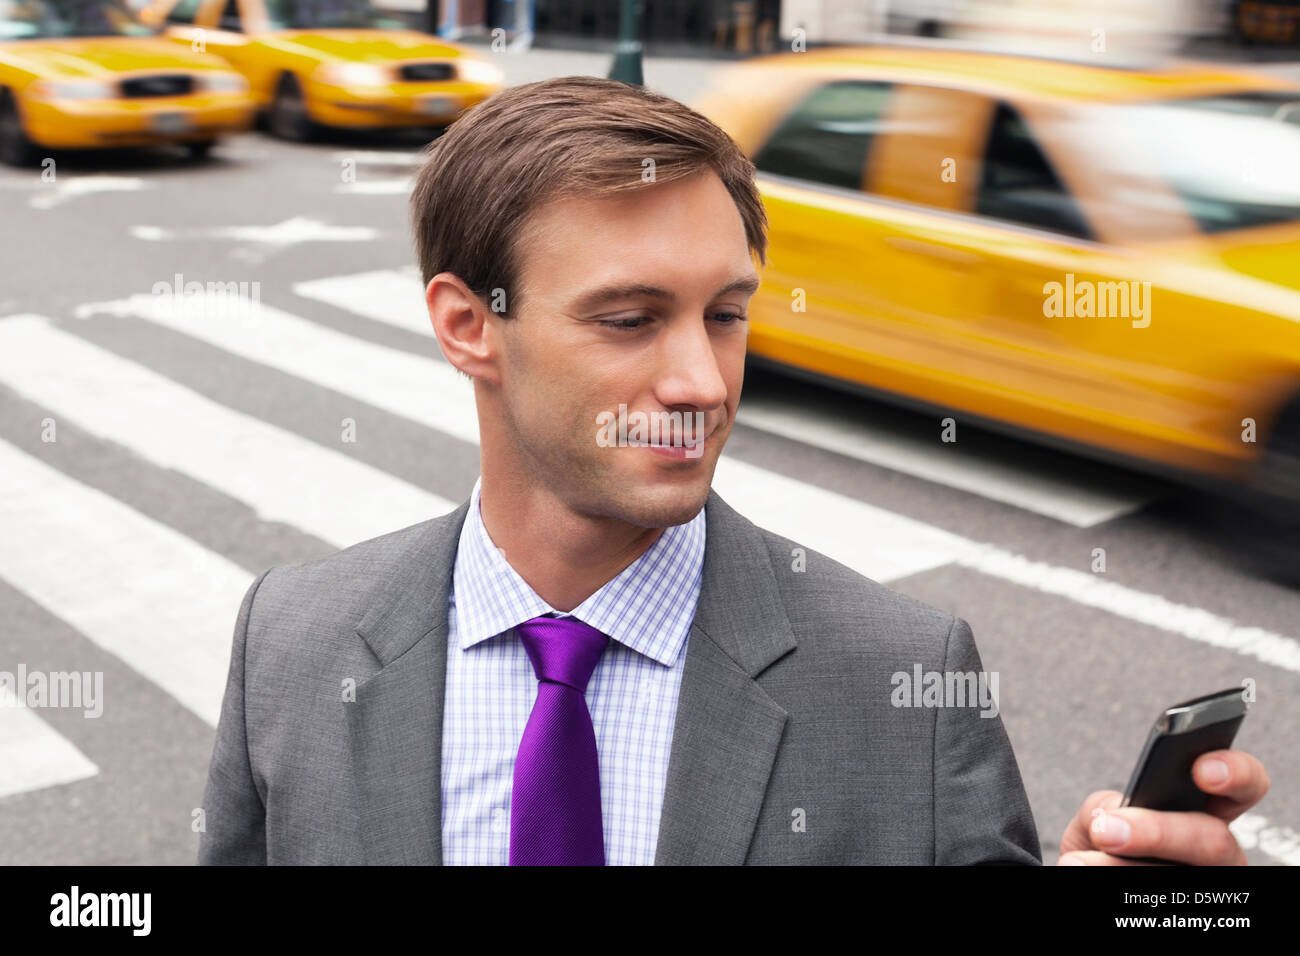 Businessman using cell phone on city street Banque D'Images